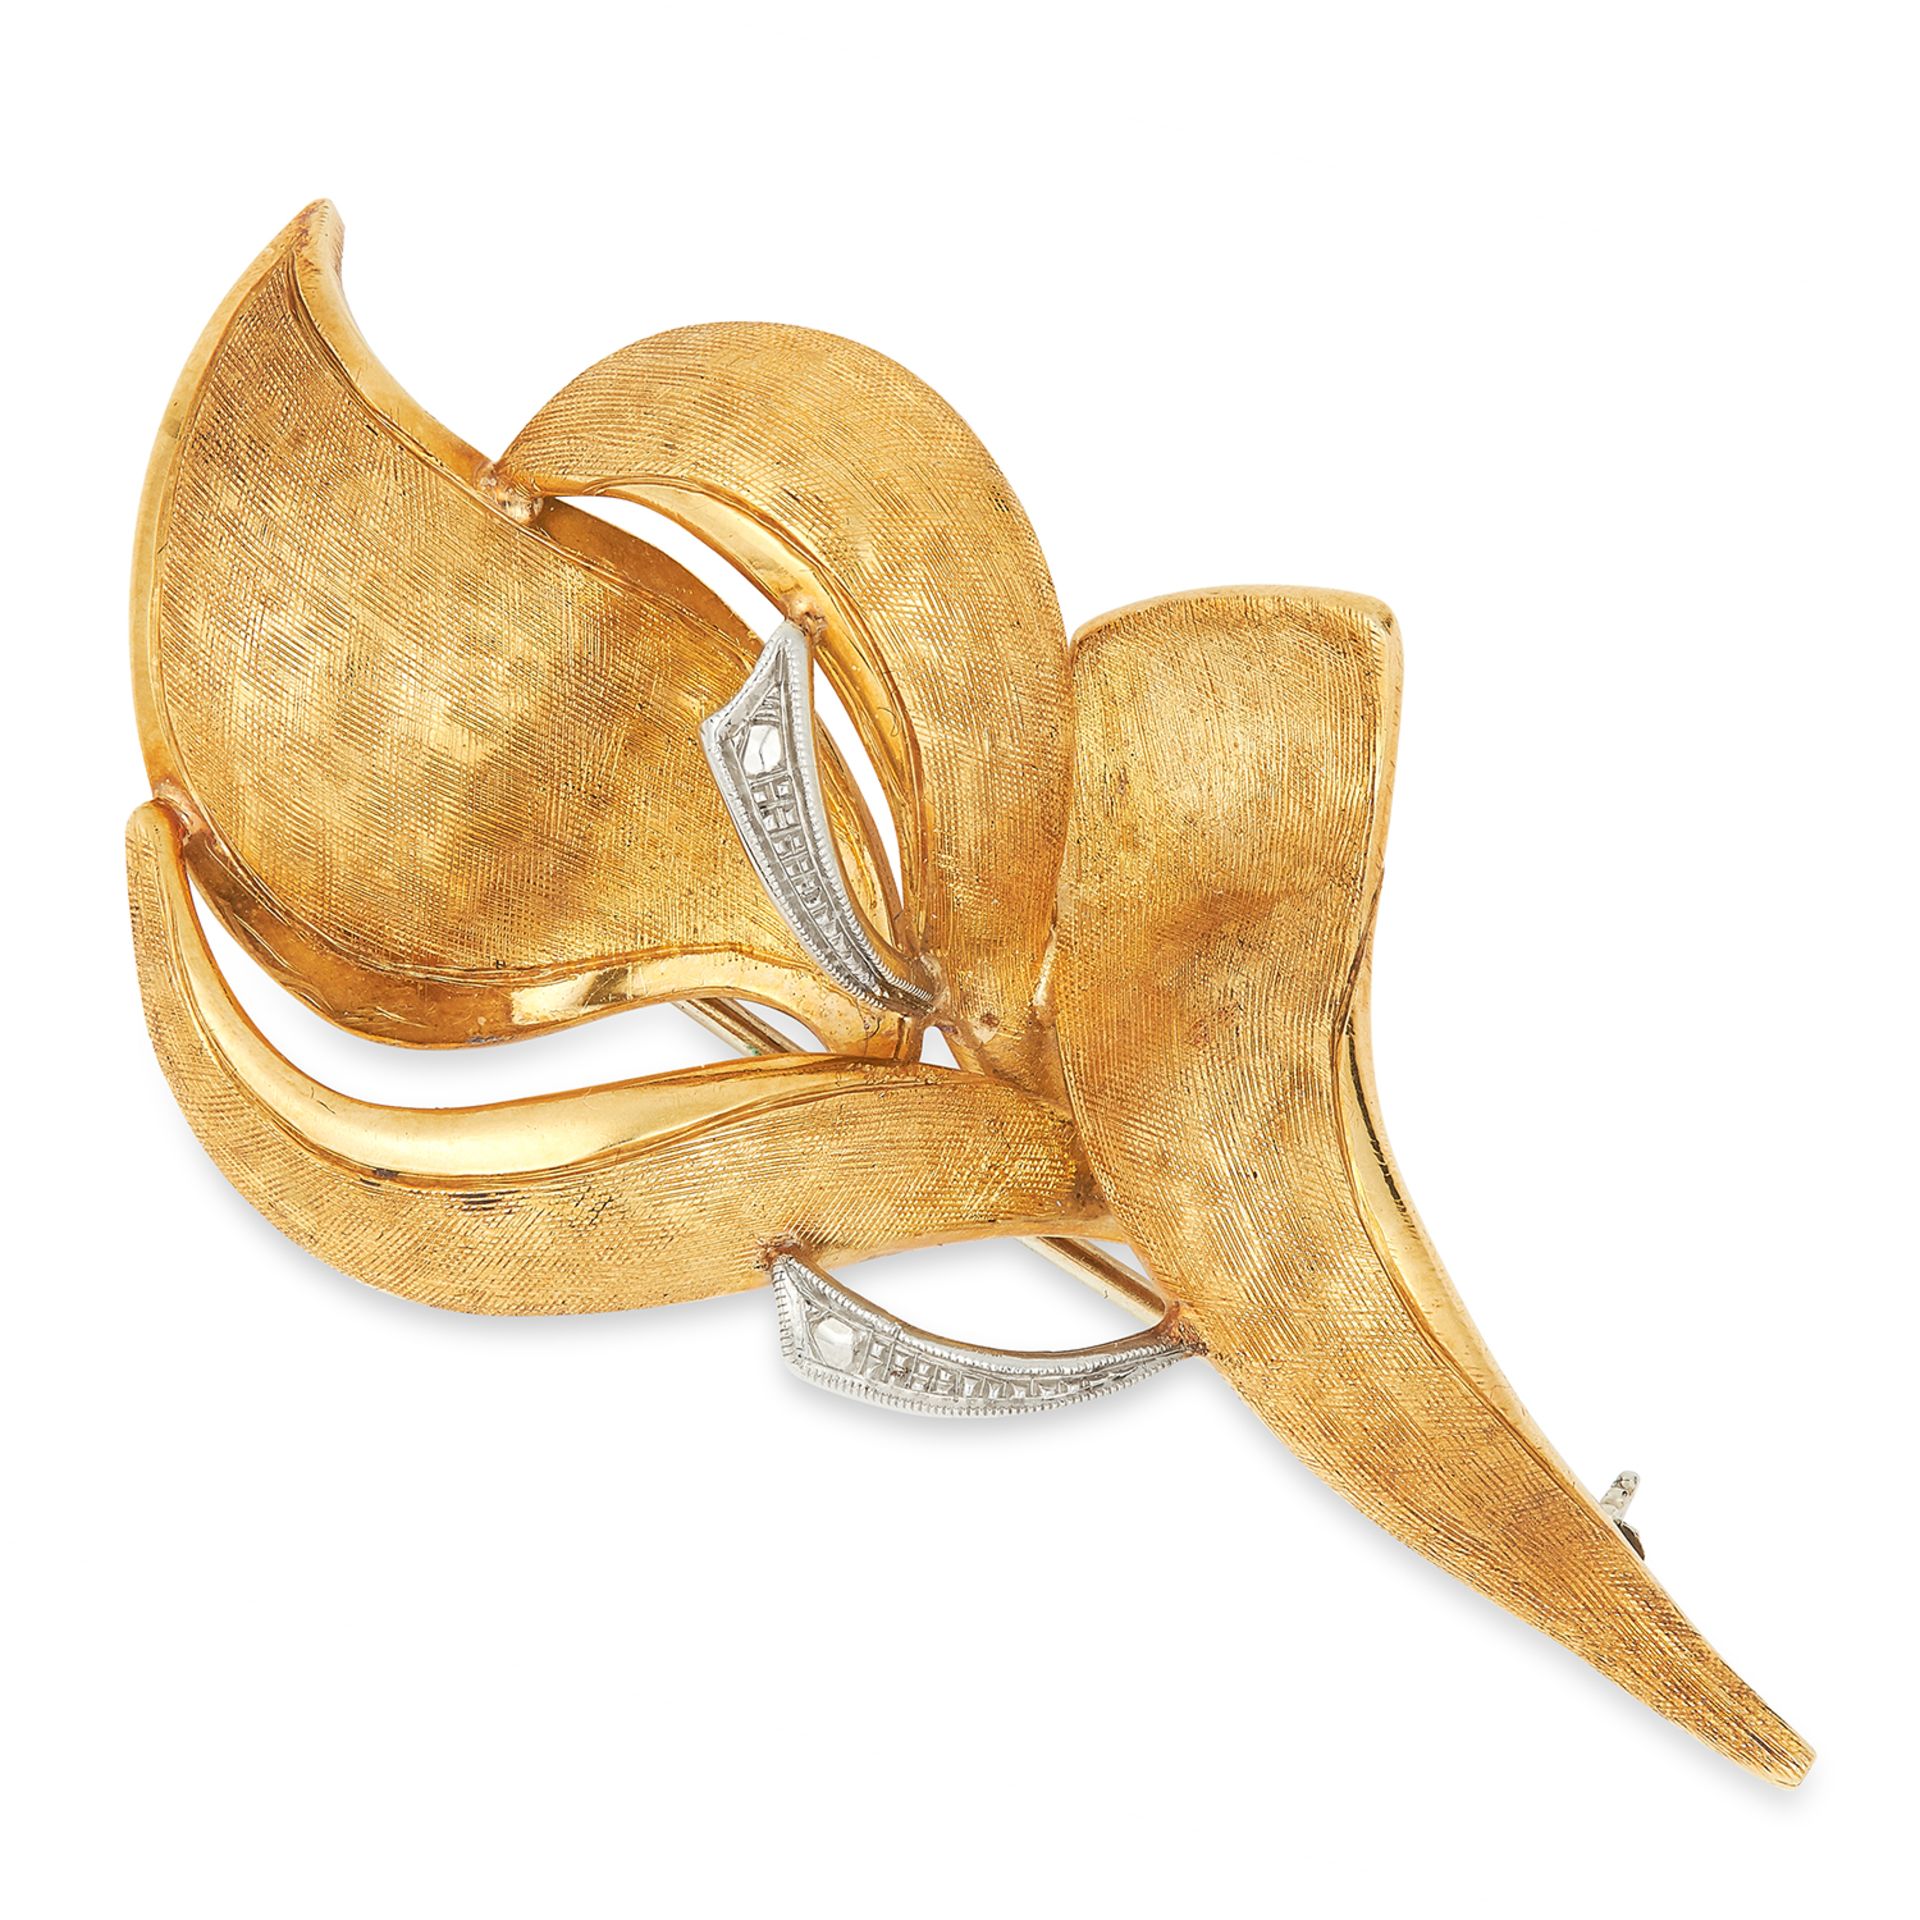 TEXTURED GOLD BROOCH in abstract design, 6cm, 8.2g.